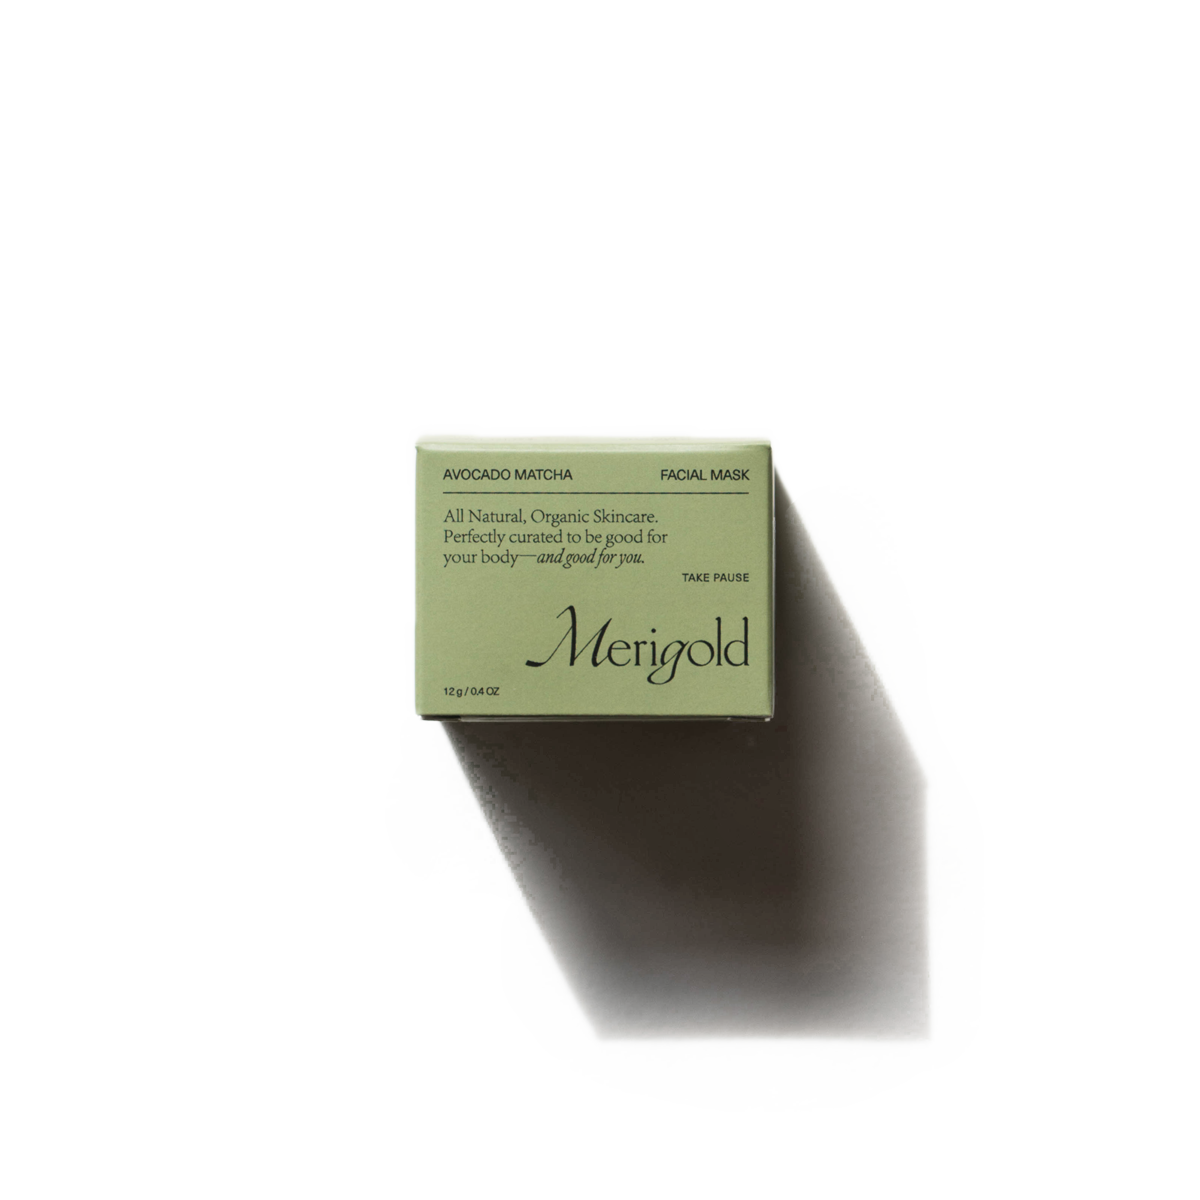 merigold skin care - avocado matcha face mask made with all natural and organic ingredients